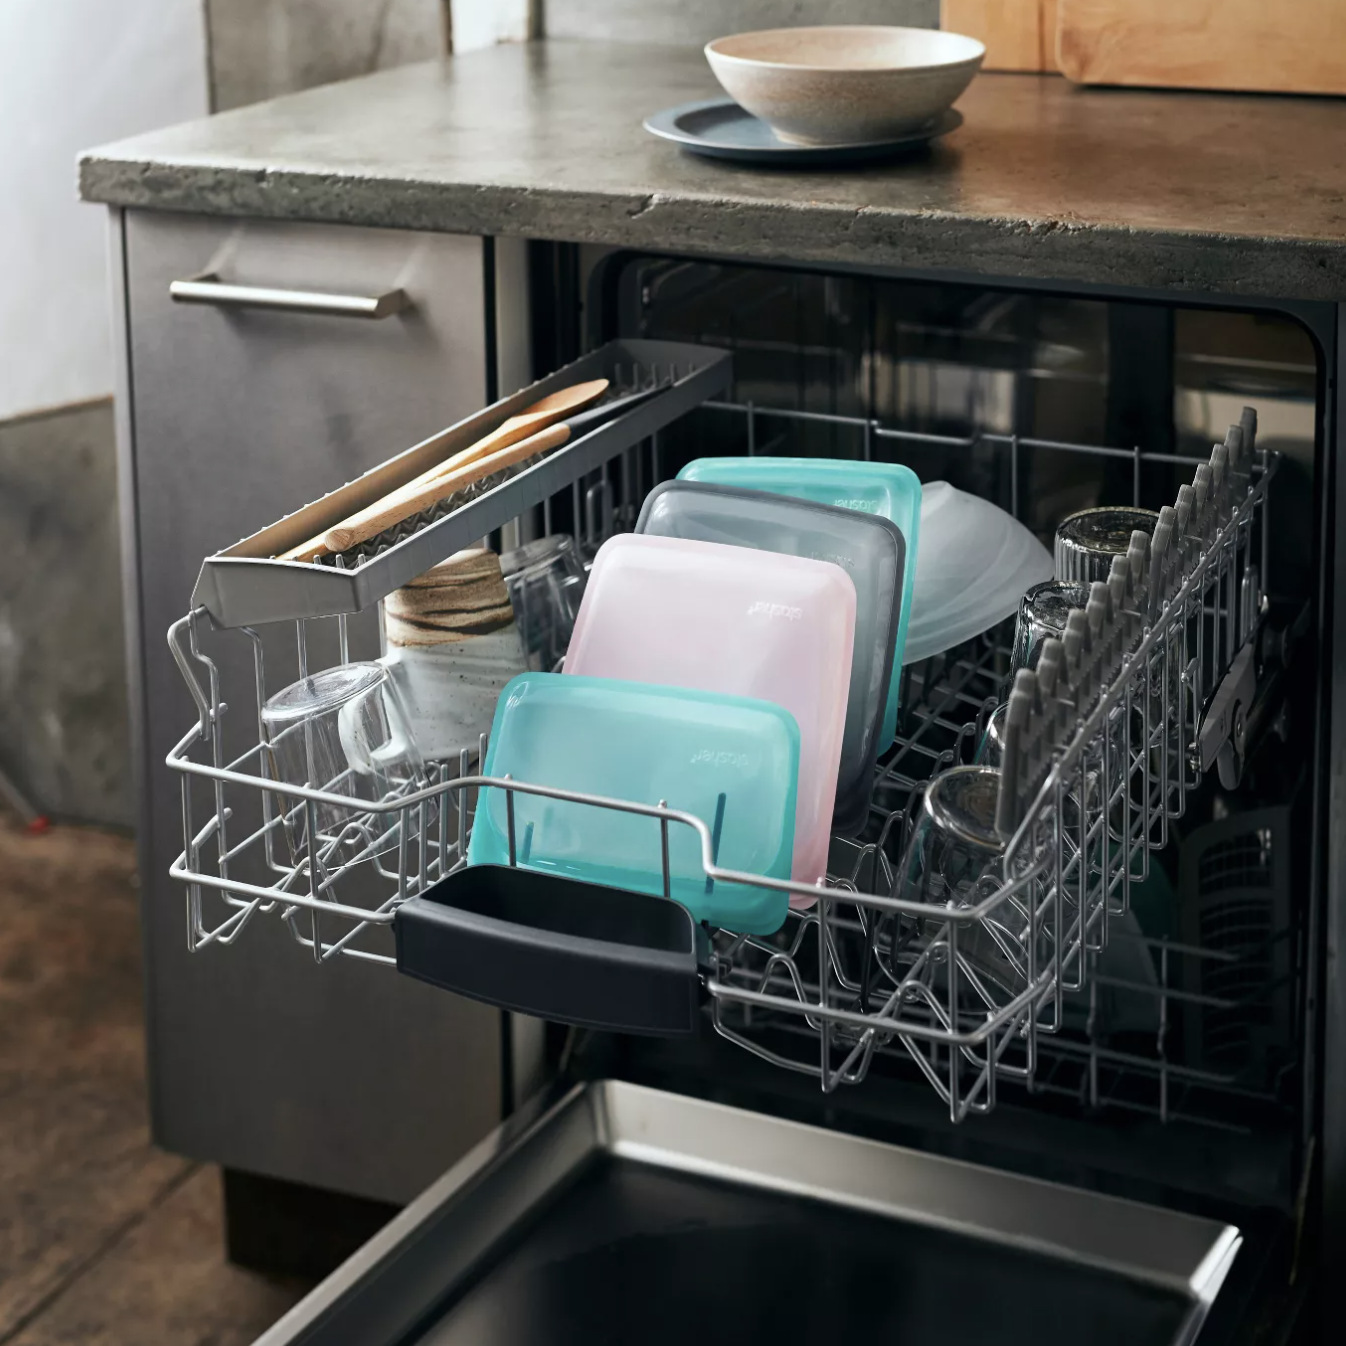 an array of stasher bags in a dishwasher